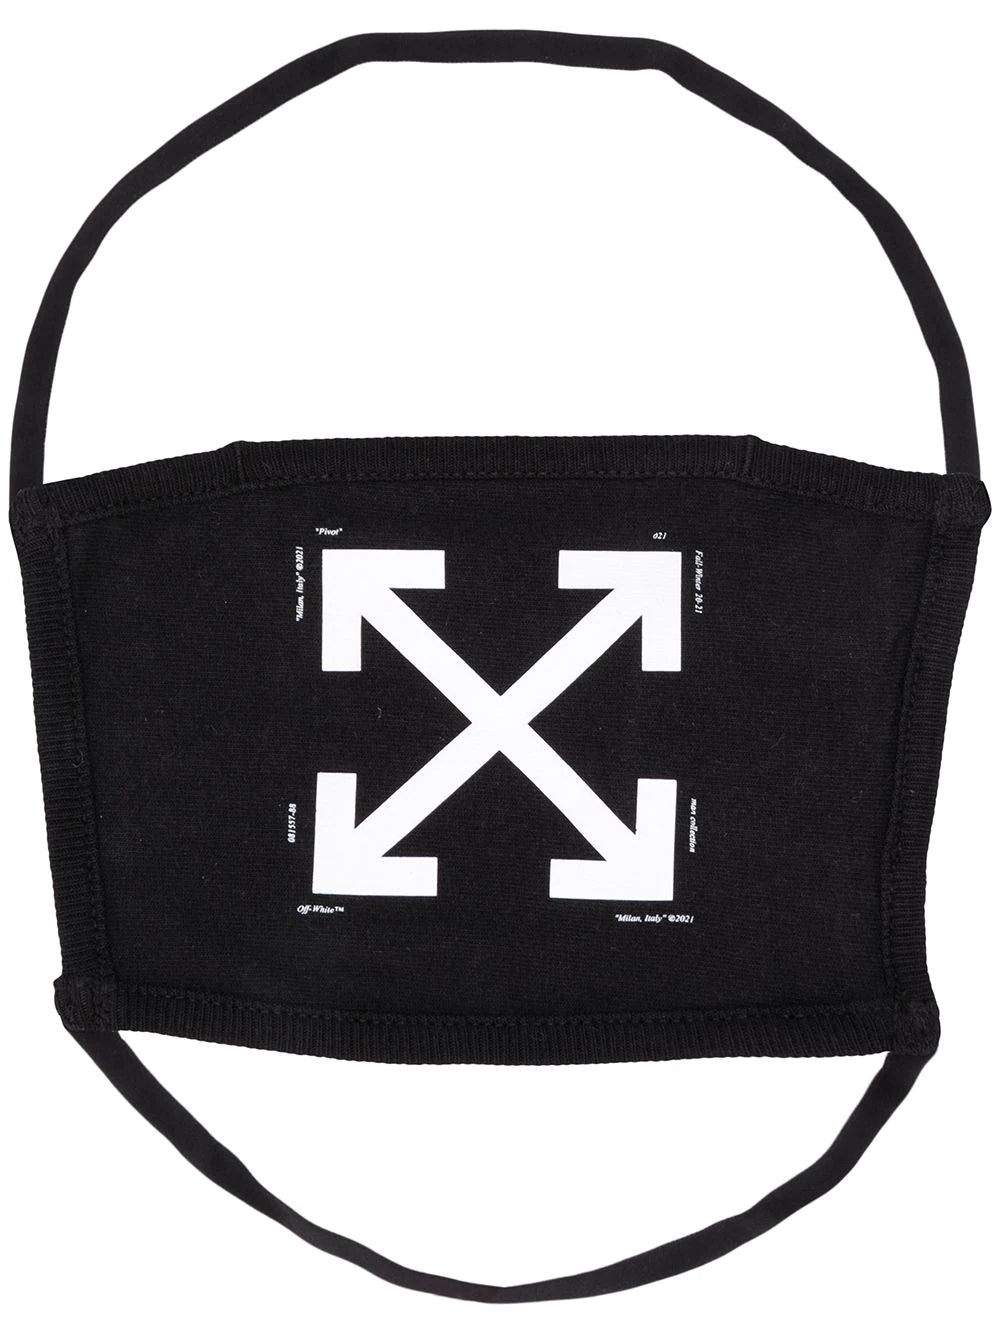 Off-White Arrows face mask